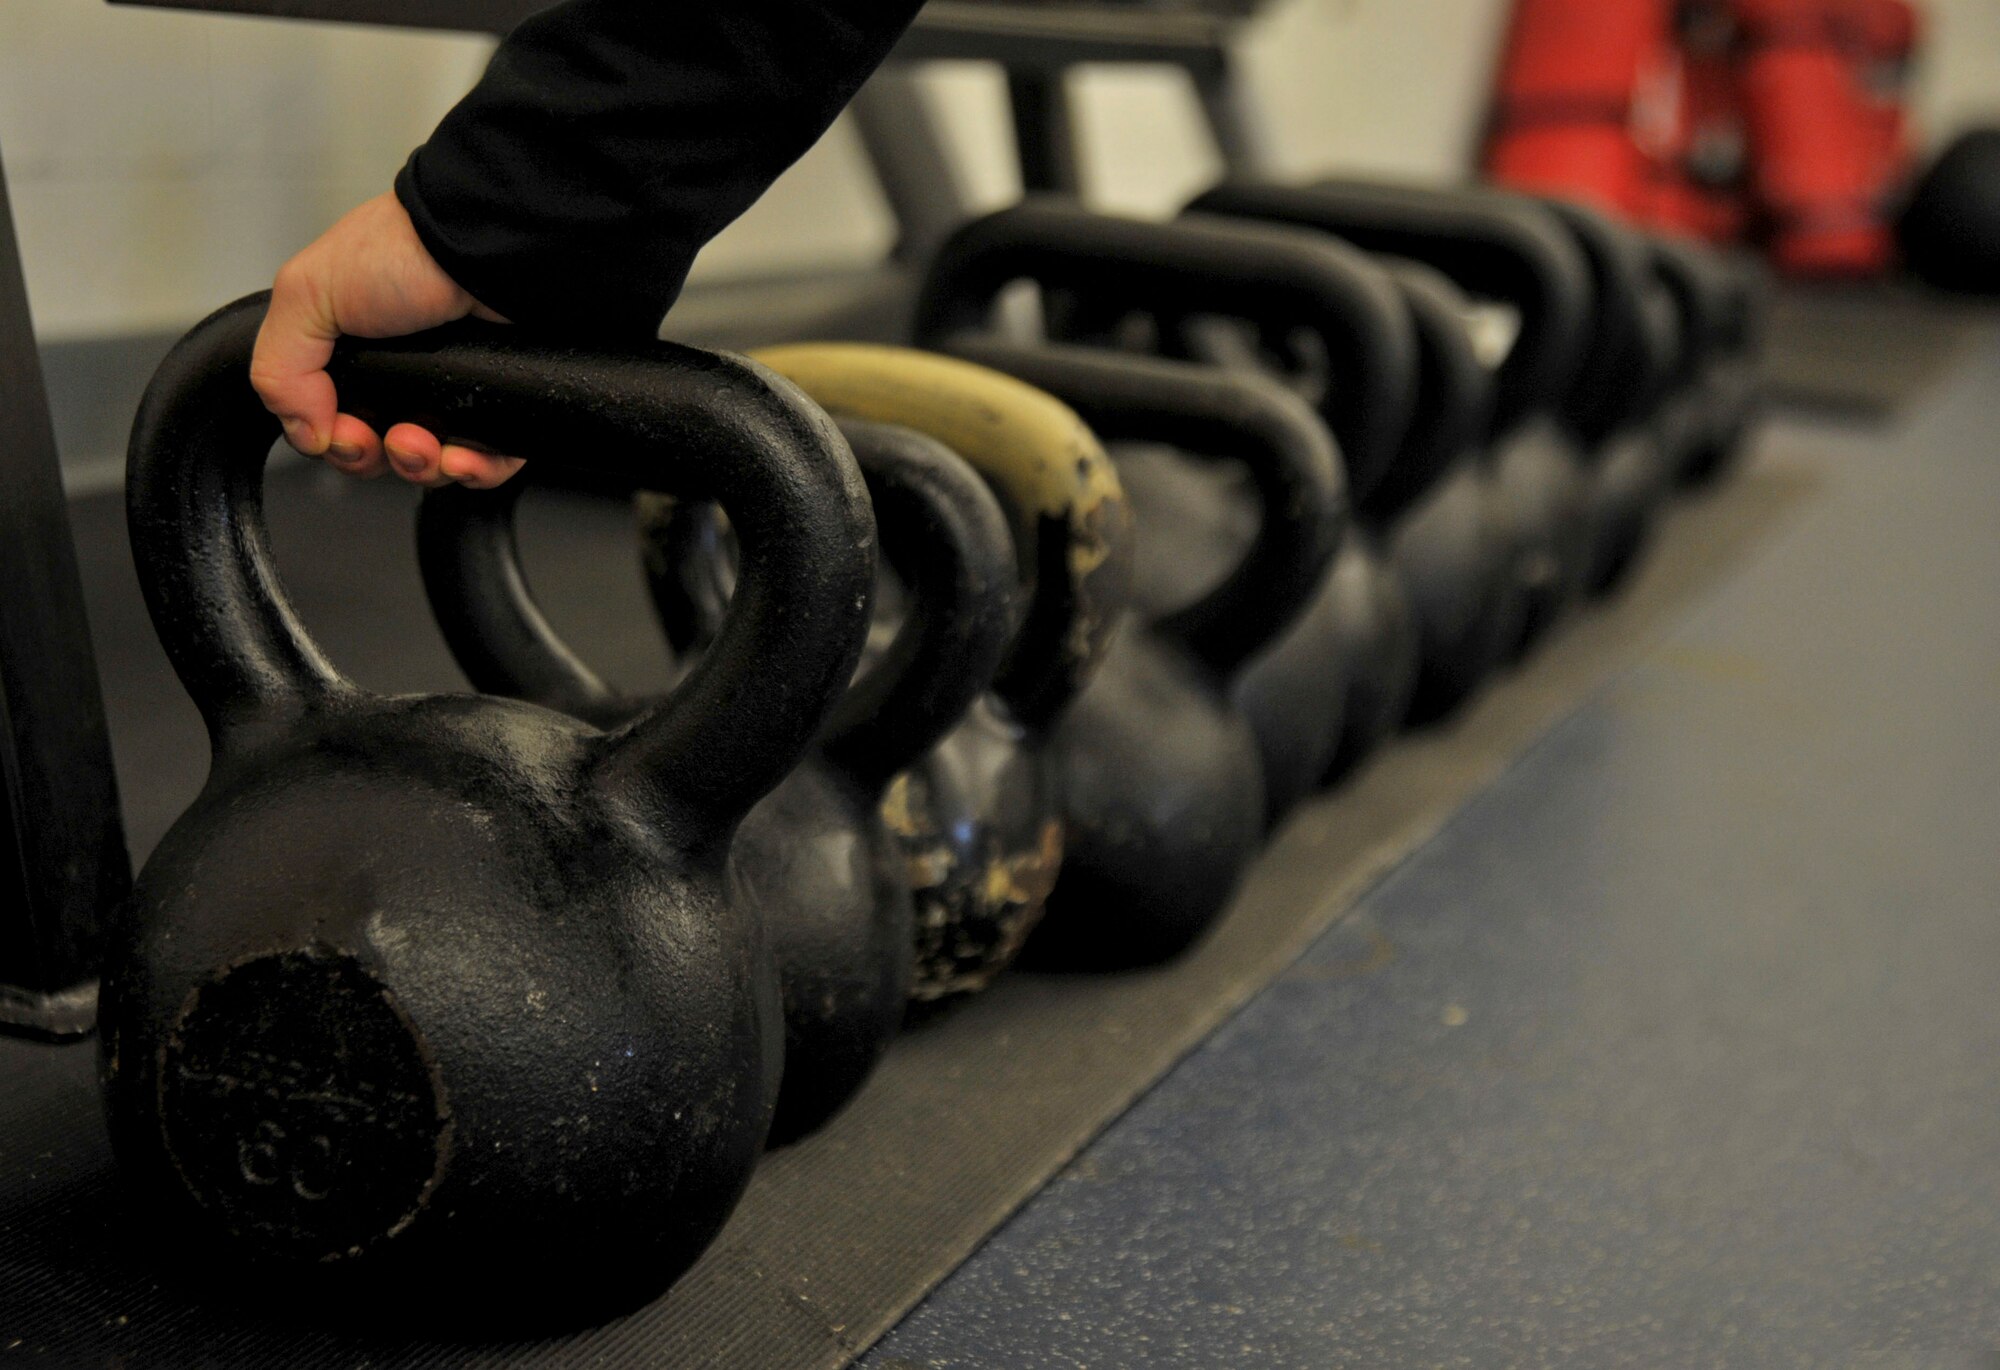 Nicole Larson, Aderholt Gym Kettlebell Fit class instructor, reaches for a kettlebell at Hurlburt Field, Fla., Jan. 27, 2014. Kettlebell training is a weight-in-motion workout, which focuses on cardiovascular, flexibility, strength and balance. (U.S. Air Force photo/Airman 1st Class Andrea Posey)